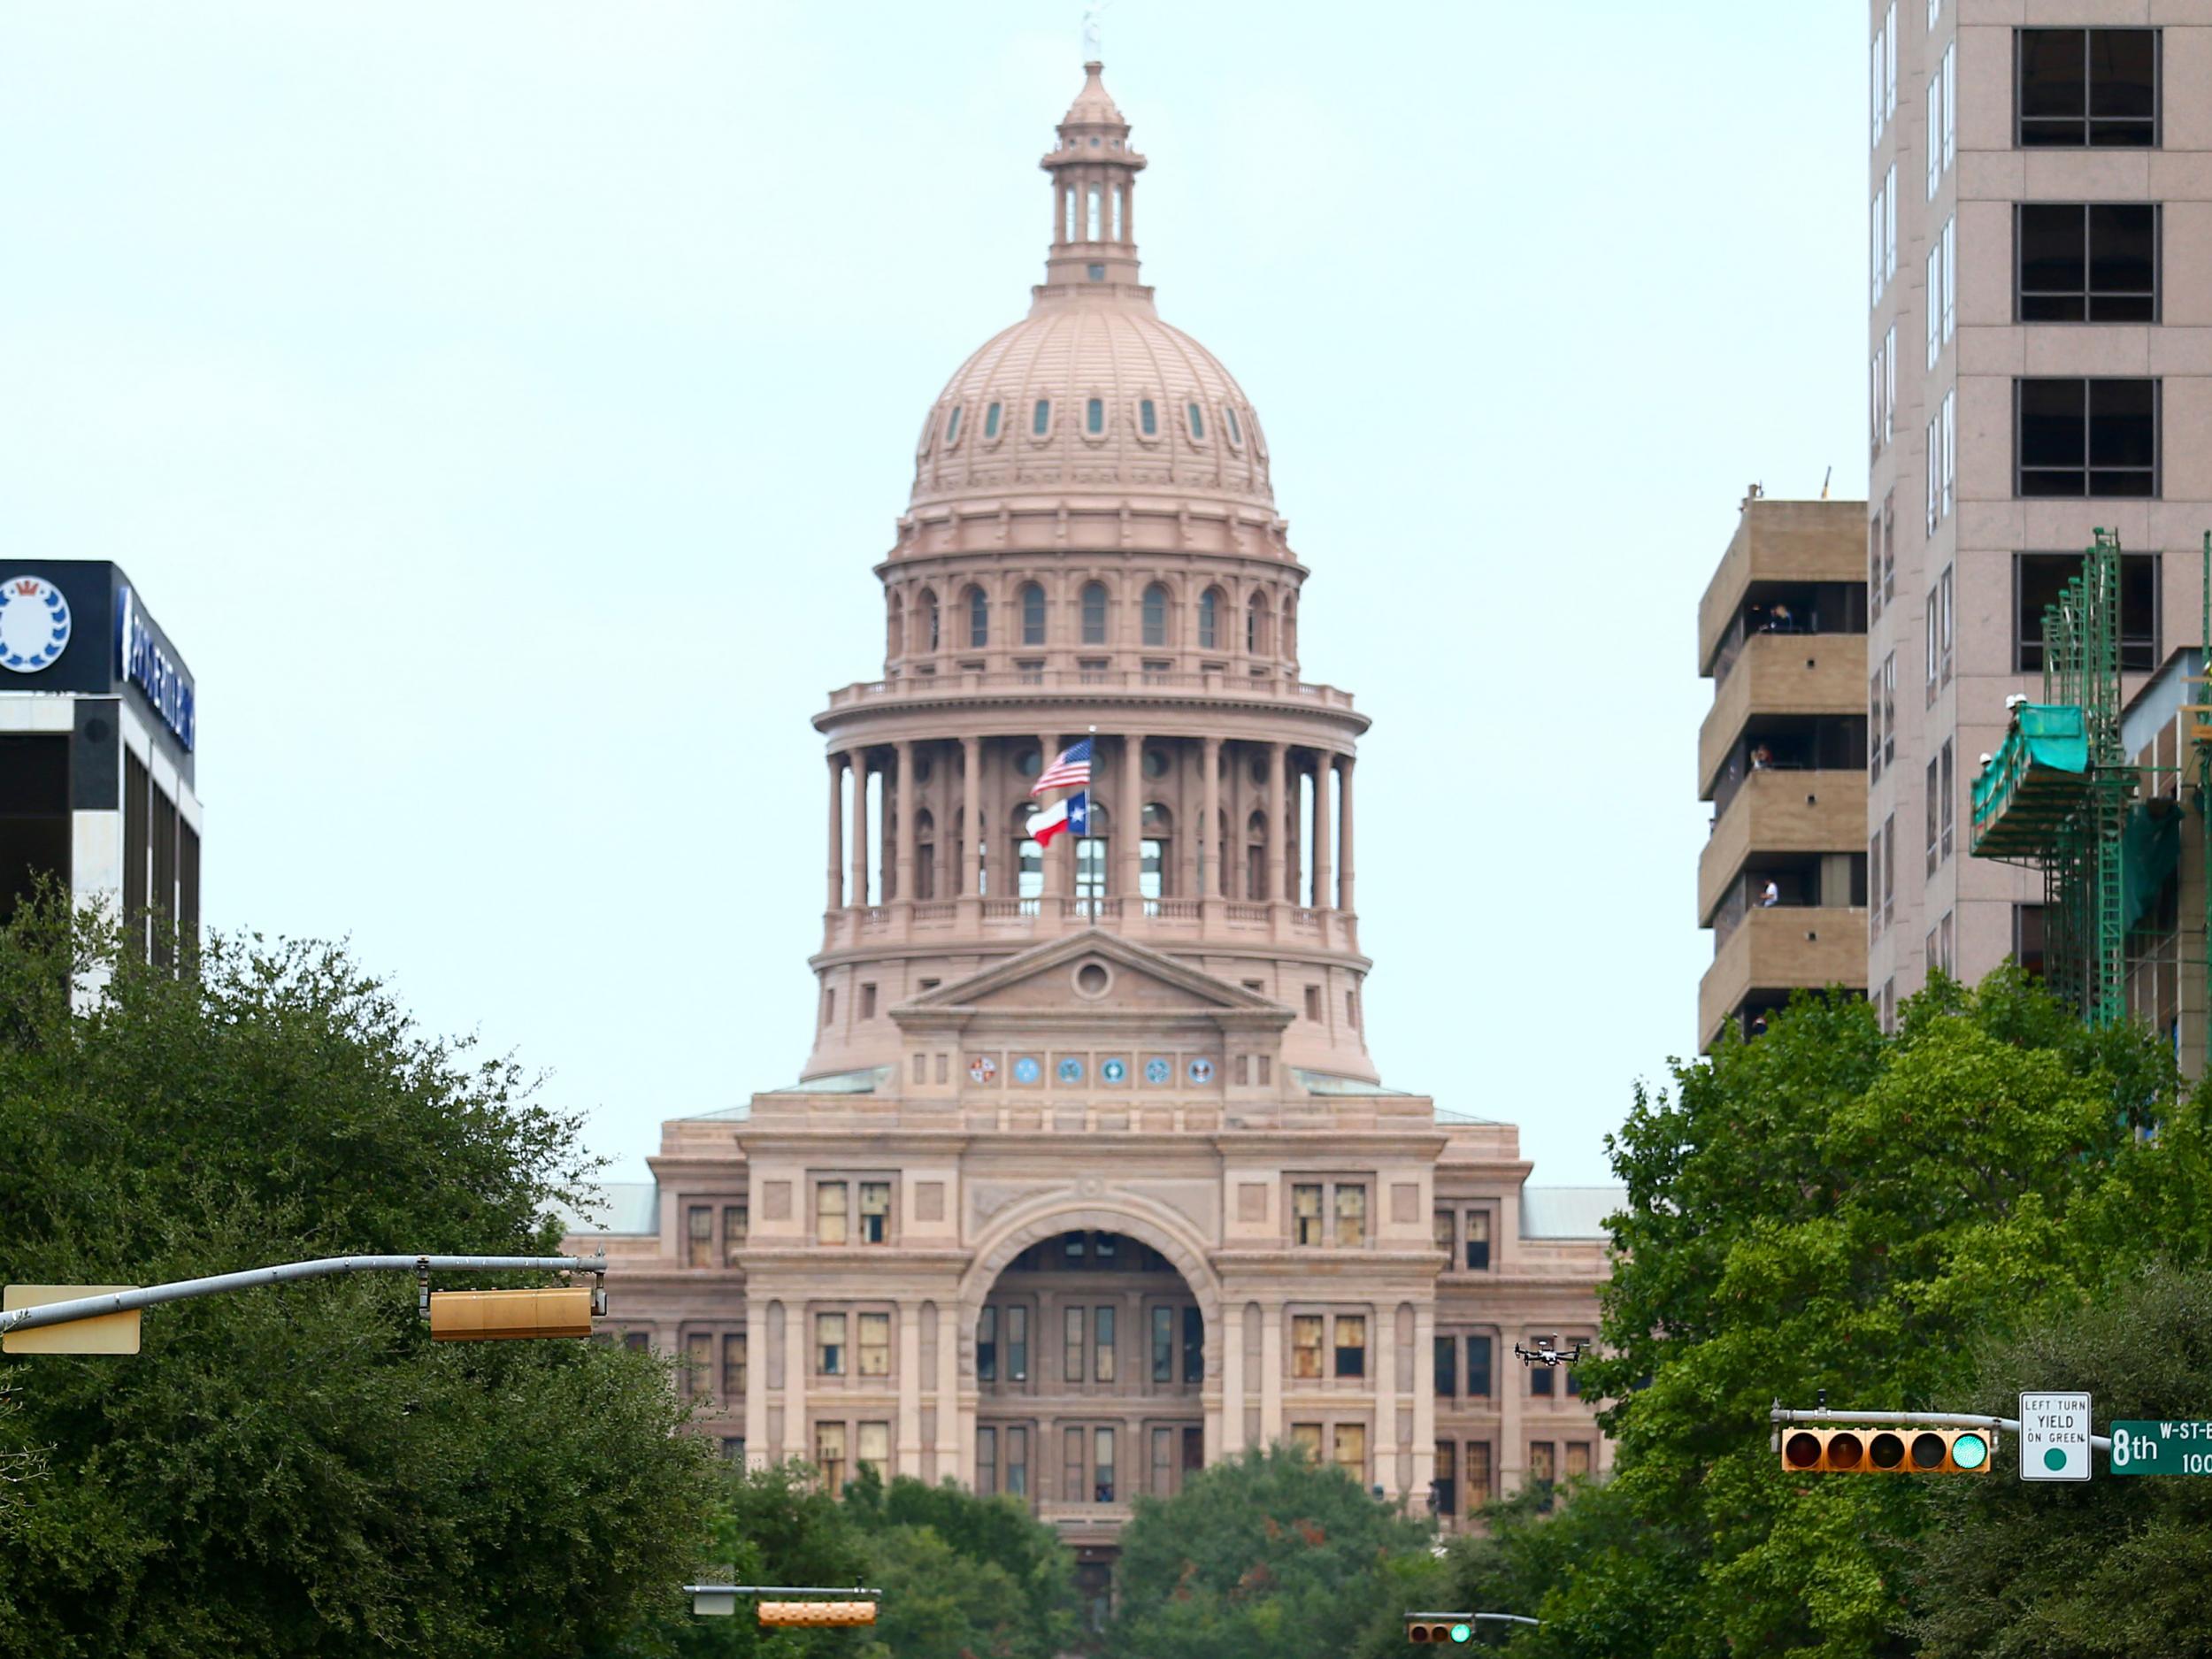 The state capitol in Austin, Texas, the fastest growing city in America